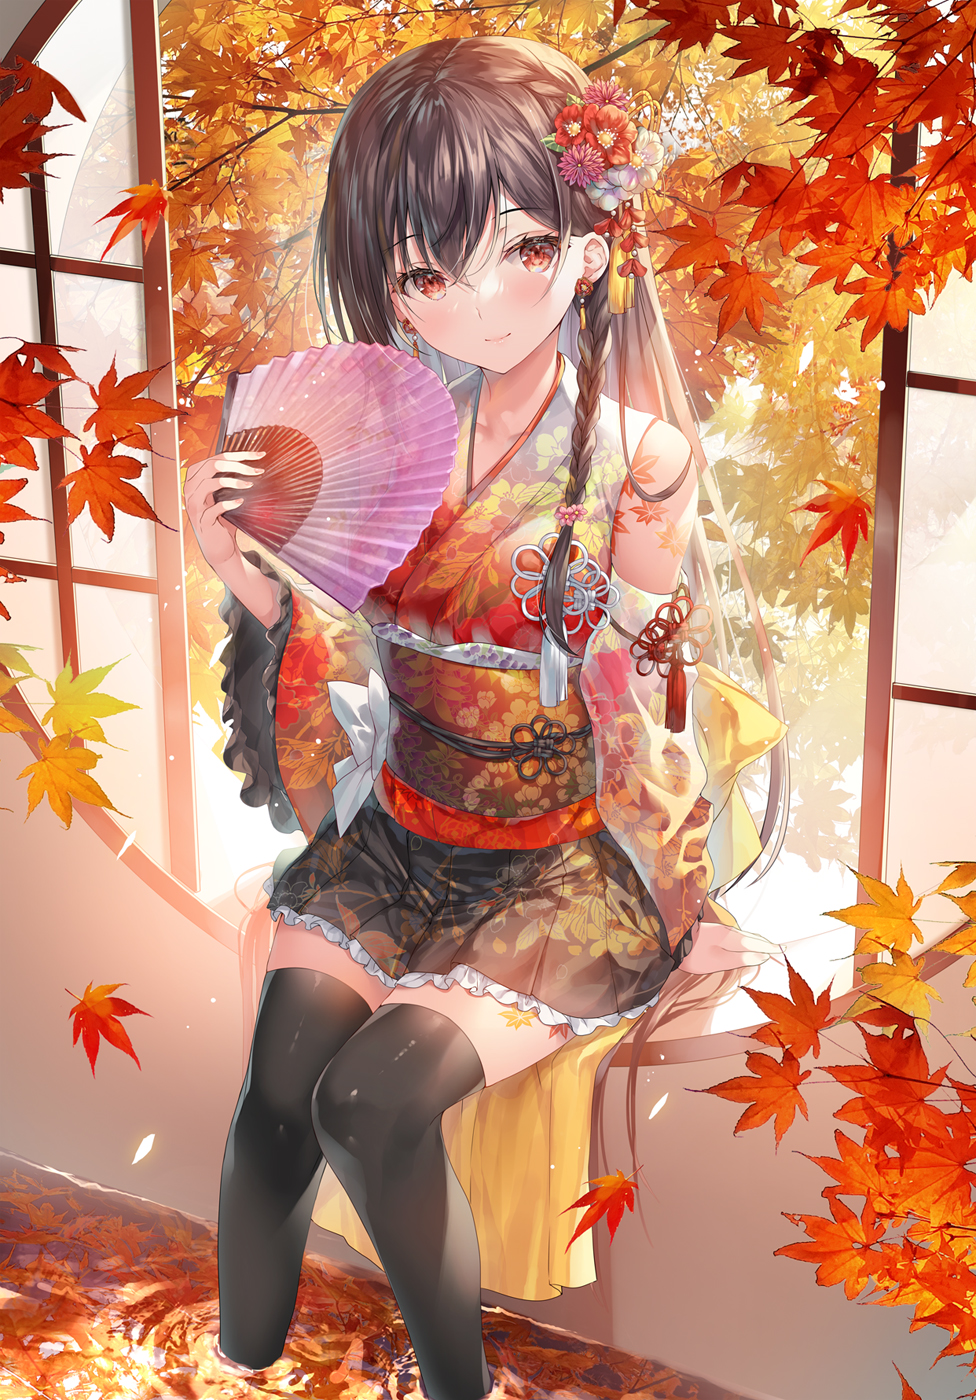 Anime Anime Girls Portrait Display Fans Chinese Dress Leaves Looking At Viewer Smiling Flower In Hai 976x1400